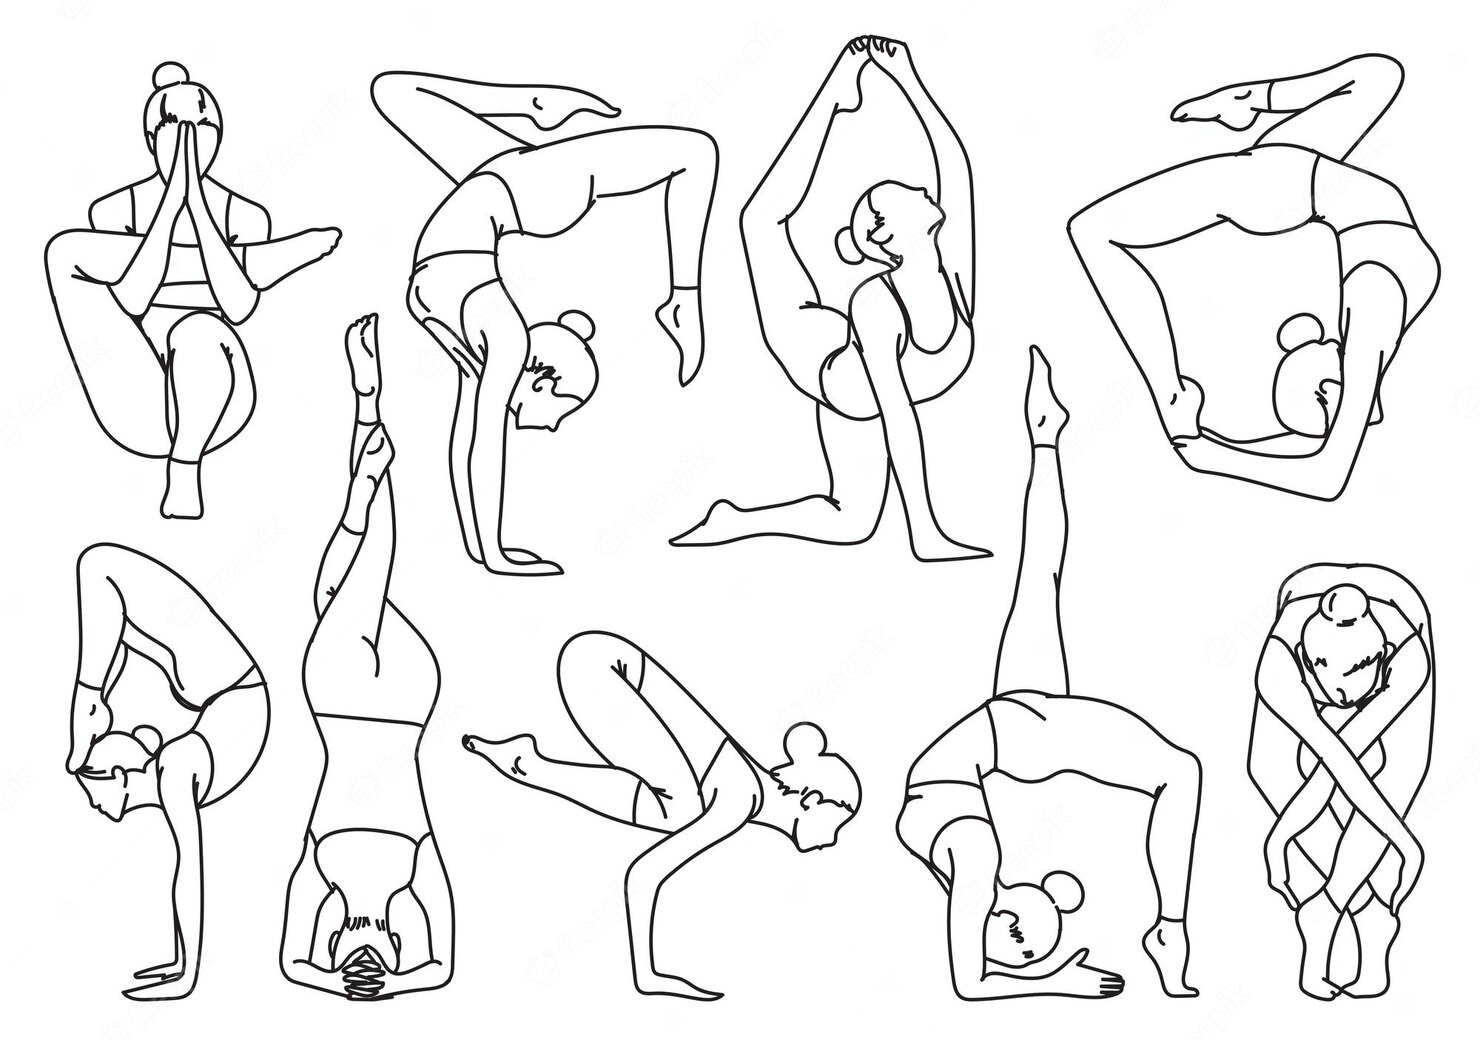 Silhouettes Girl Practicing Yoga Stretching Exercises Hand Drawing Sketch Coloring Page